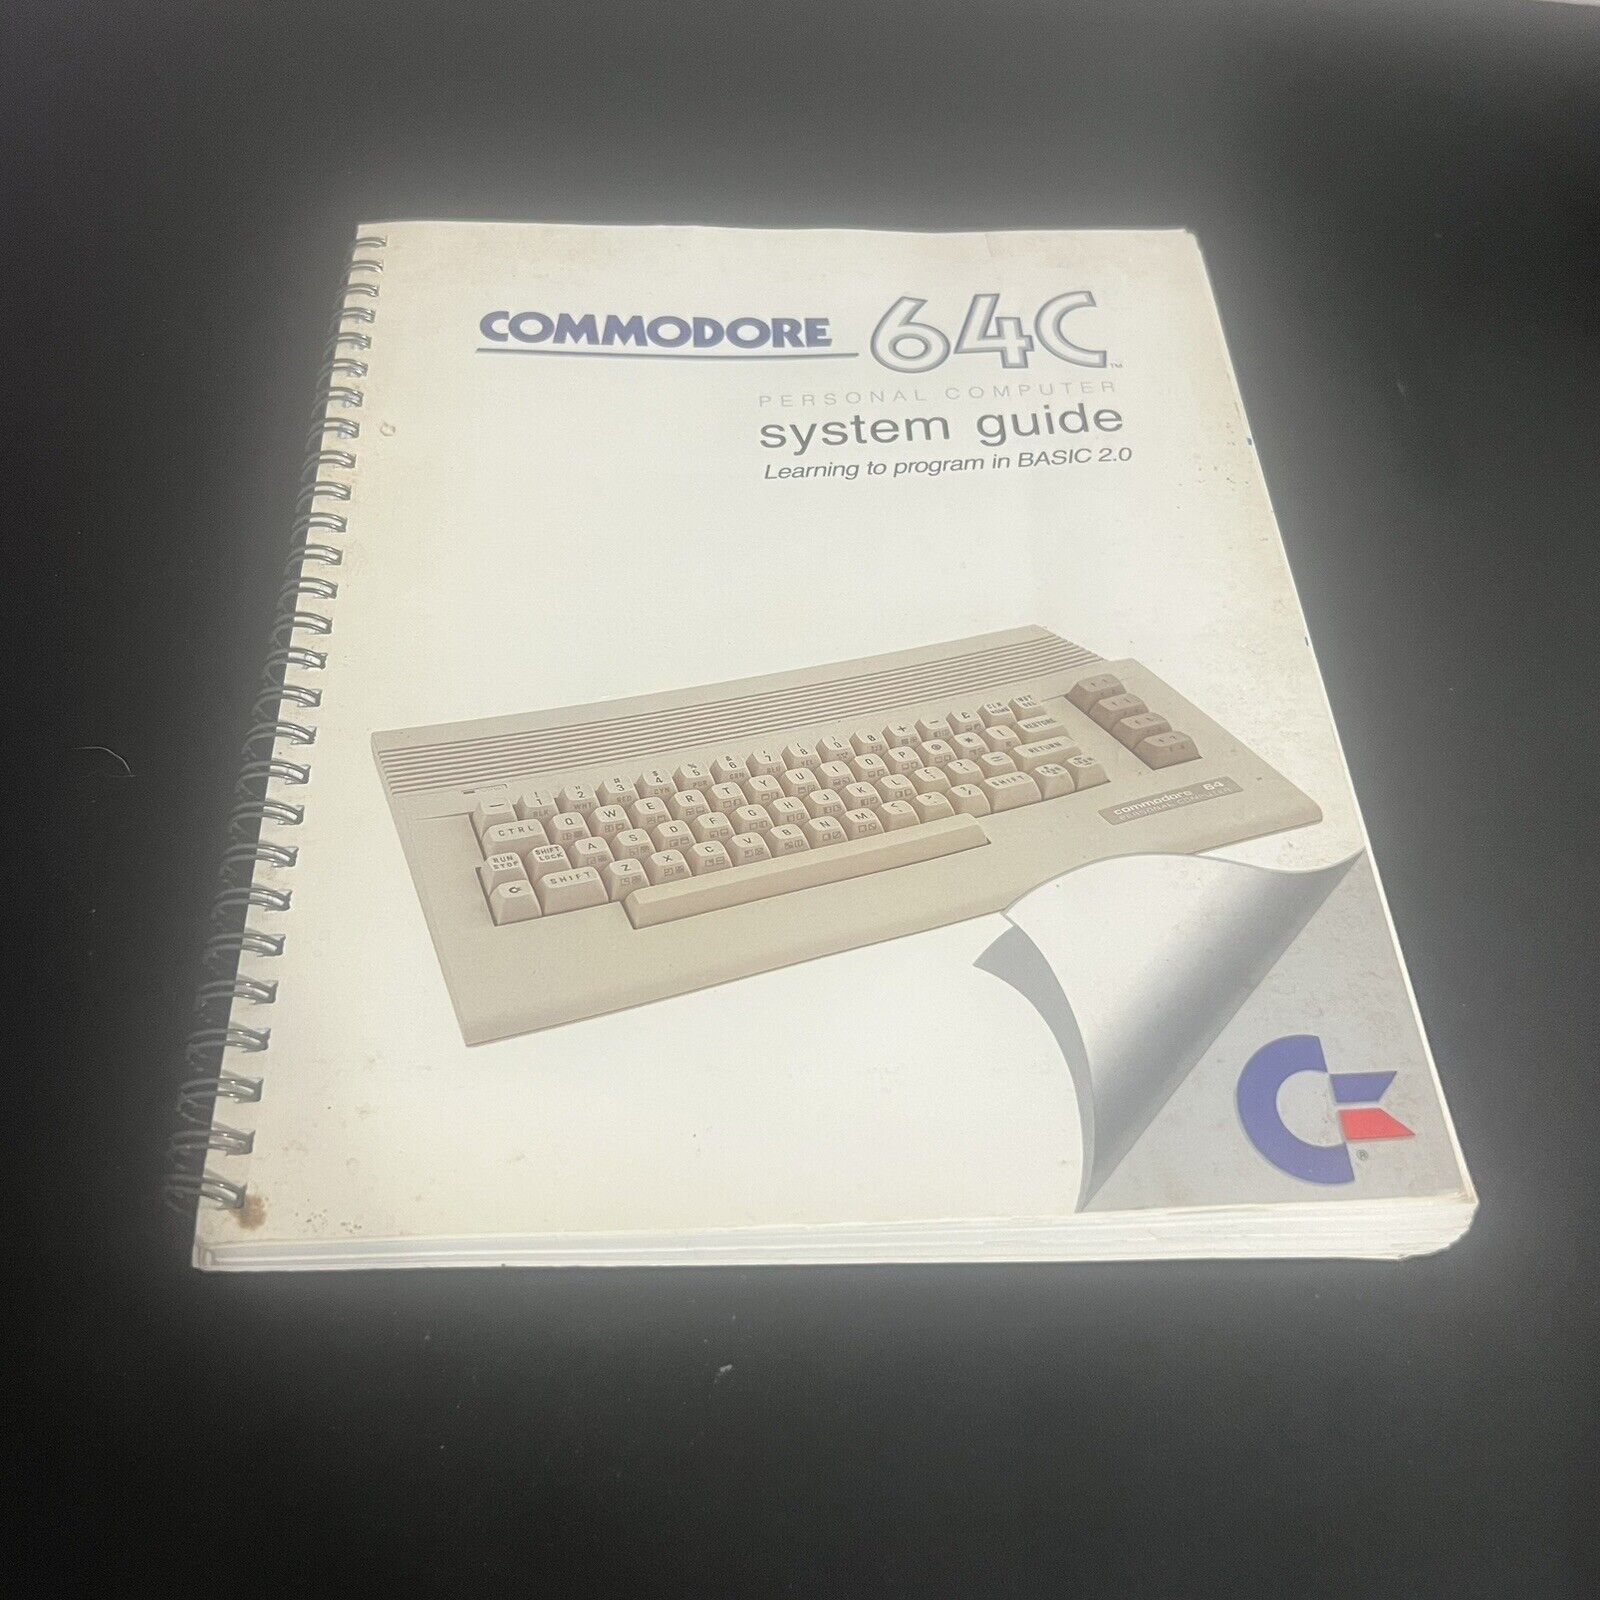 Vintage 1980s Commodore 64C System Guide: Learning to Program in BASIC 2.0